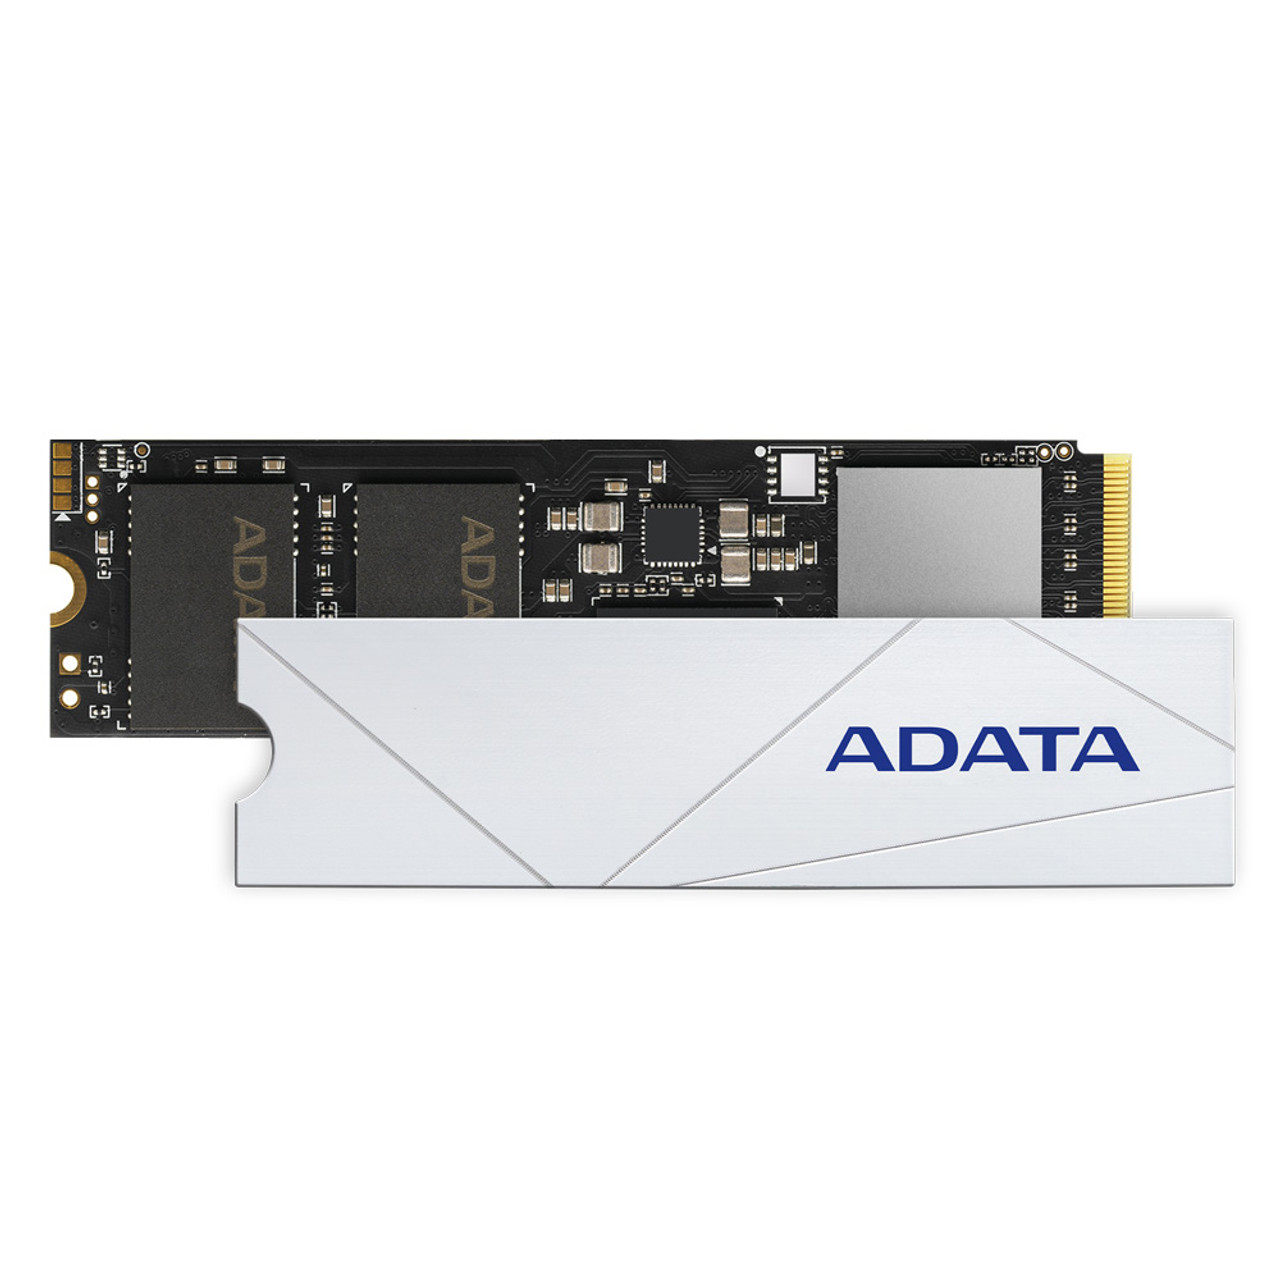 Solitario cuerda cinta ADATA PREMIUM SSD FOR PS5 1TB PCIe Gen4 x4 M.2 2280 Internal Solid State  Drive | White SSD | Ideal for Gaming | PS5 Compatible - Innogrit IG5236 |  Up to 7400MBps - 1PK - ADATA